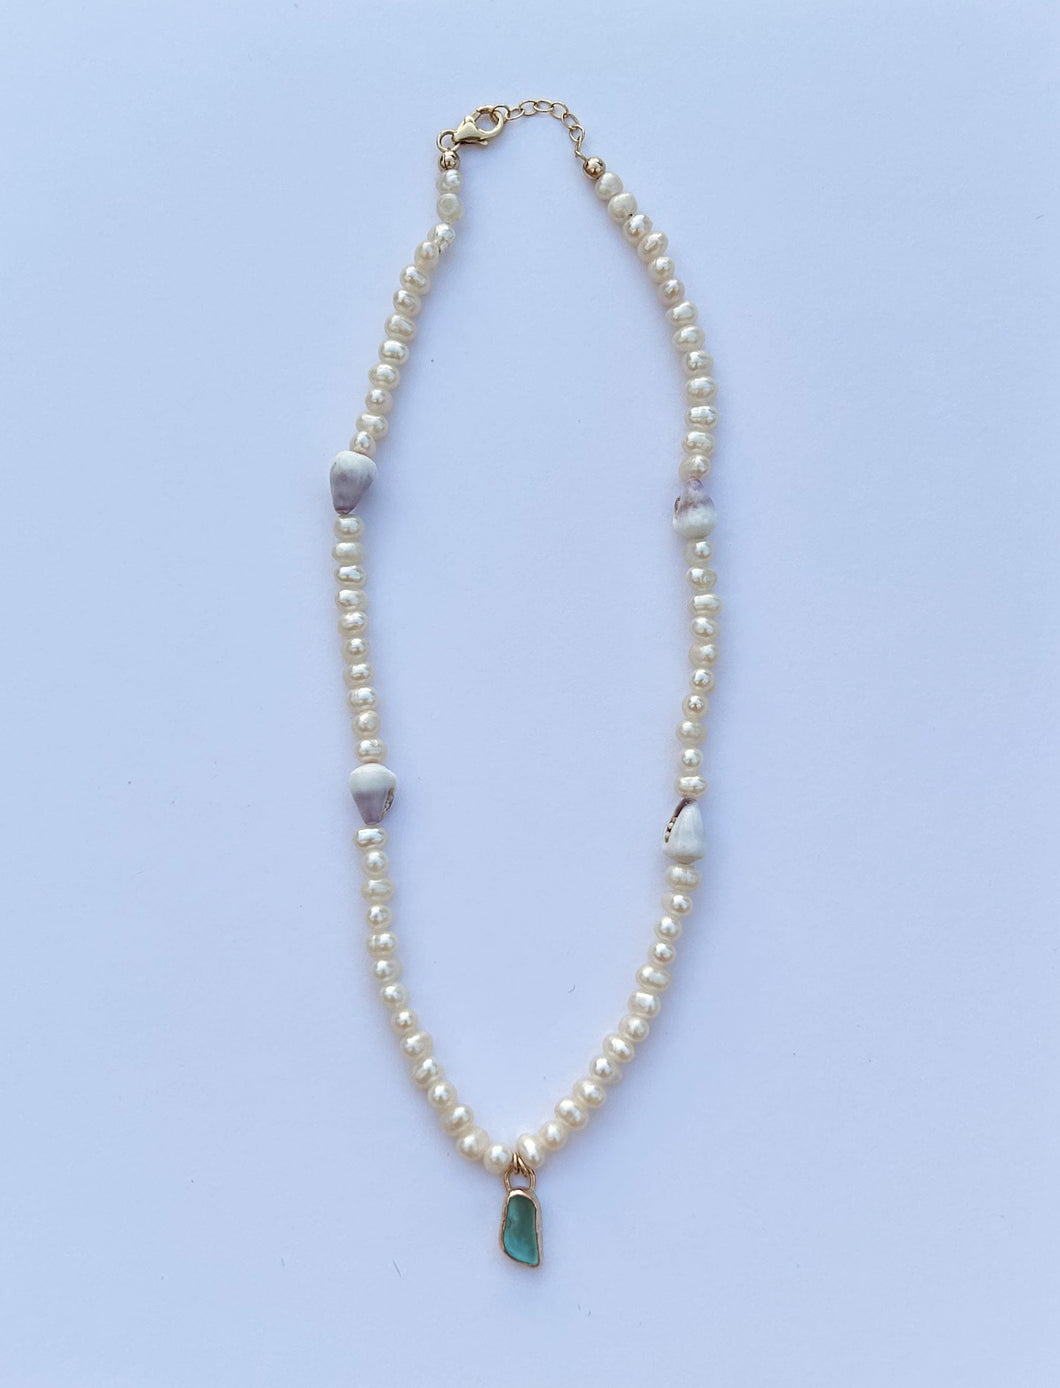 pearl, sea glass, and cone shell necklace